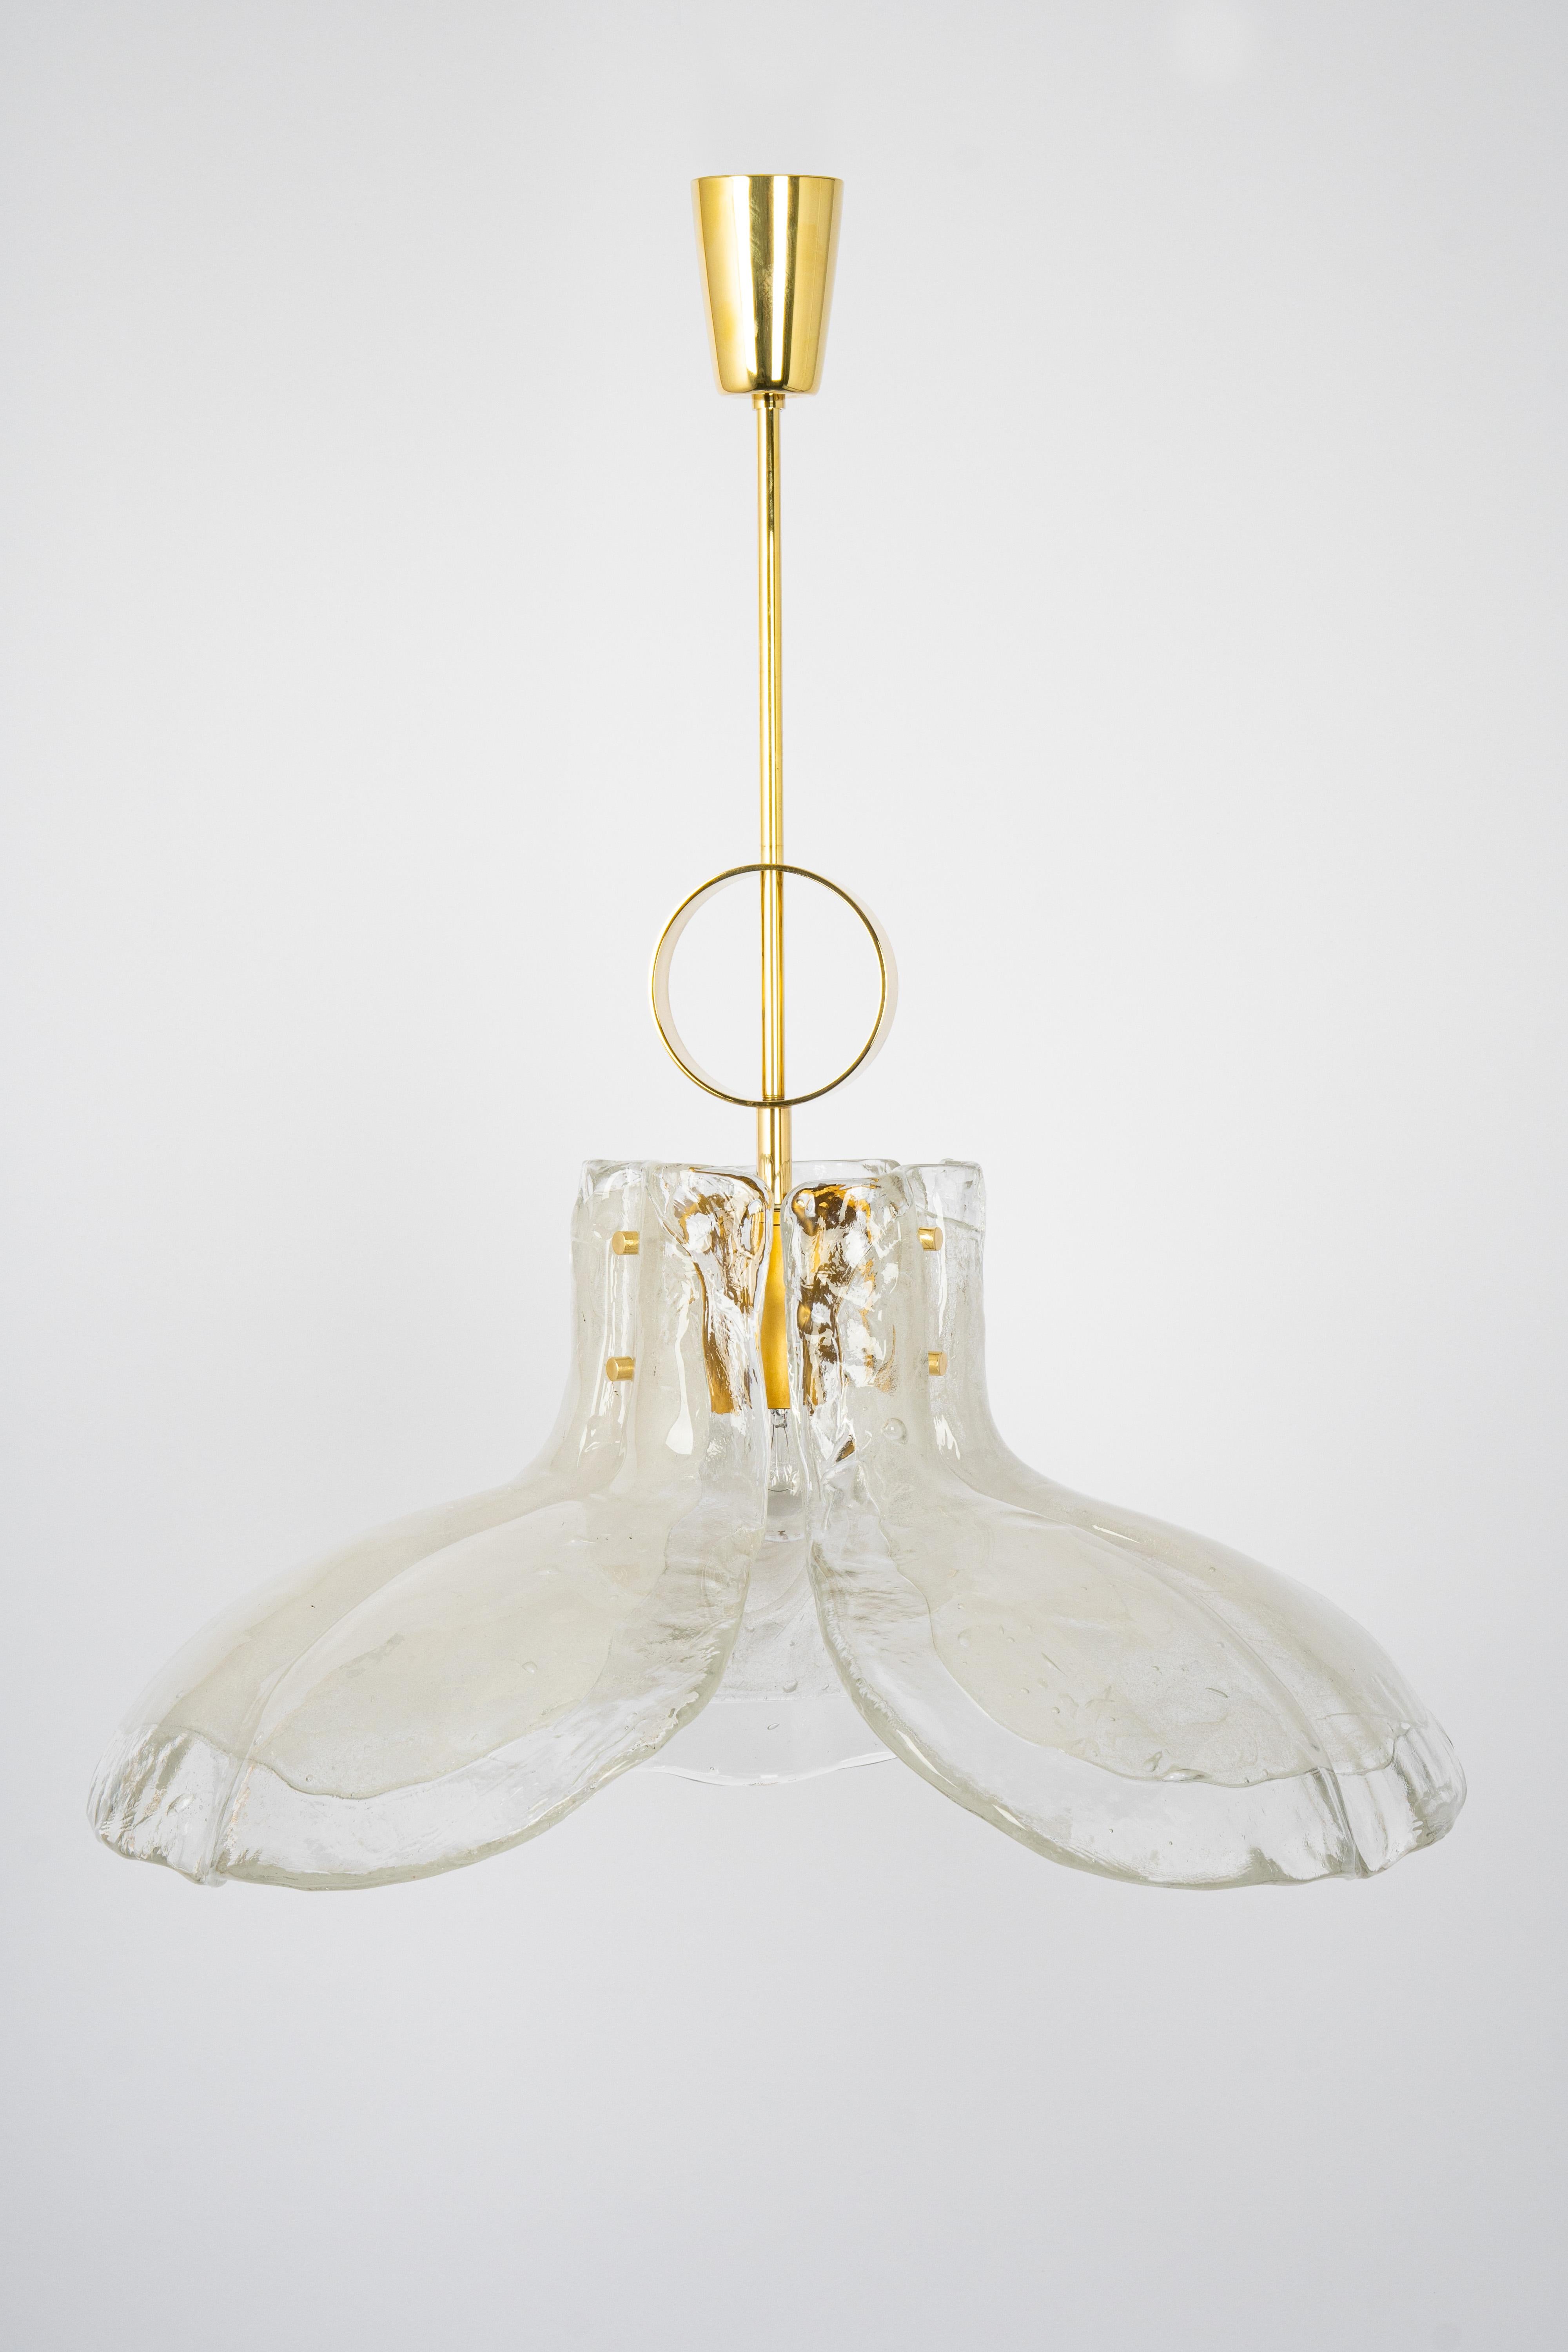 A stunning Murano white clear glass chandelier designed by Kalmar, Austria manufactured in the 1960s.
The chandelier is composed of 3 thick Murano glass elements attached to a metal frame.

High quality and in very good condition. Cleaned,